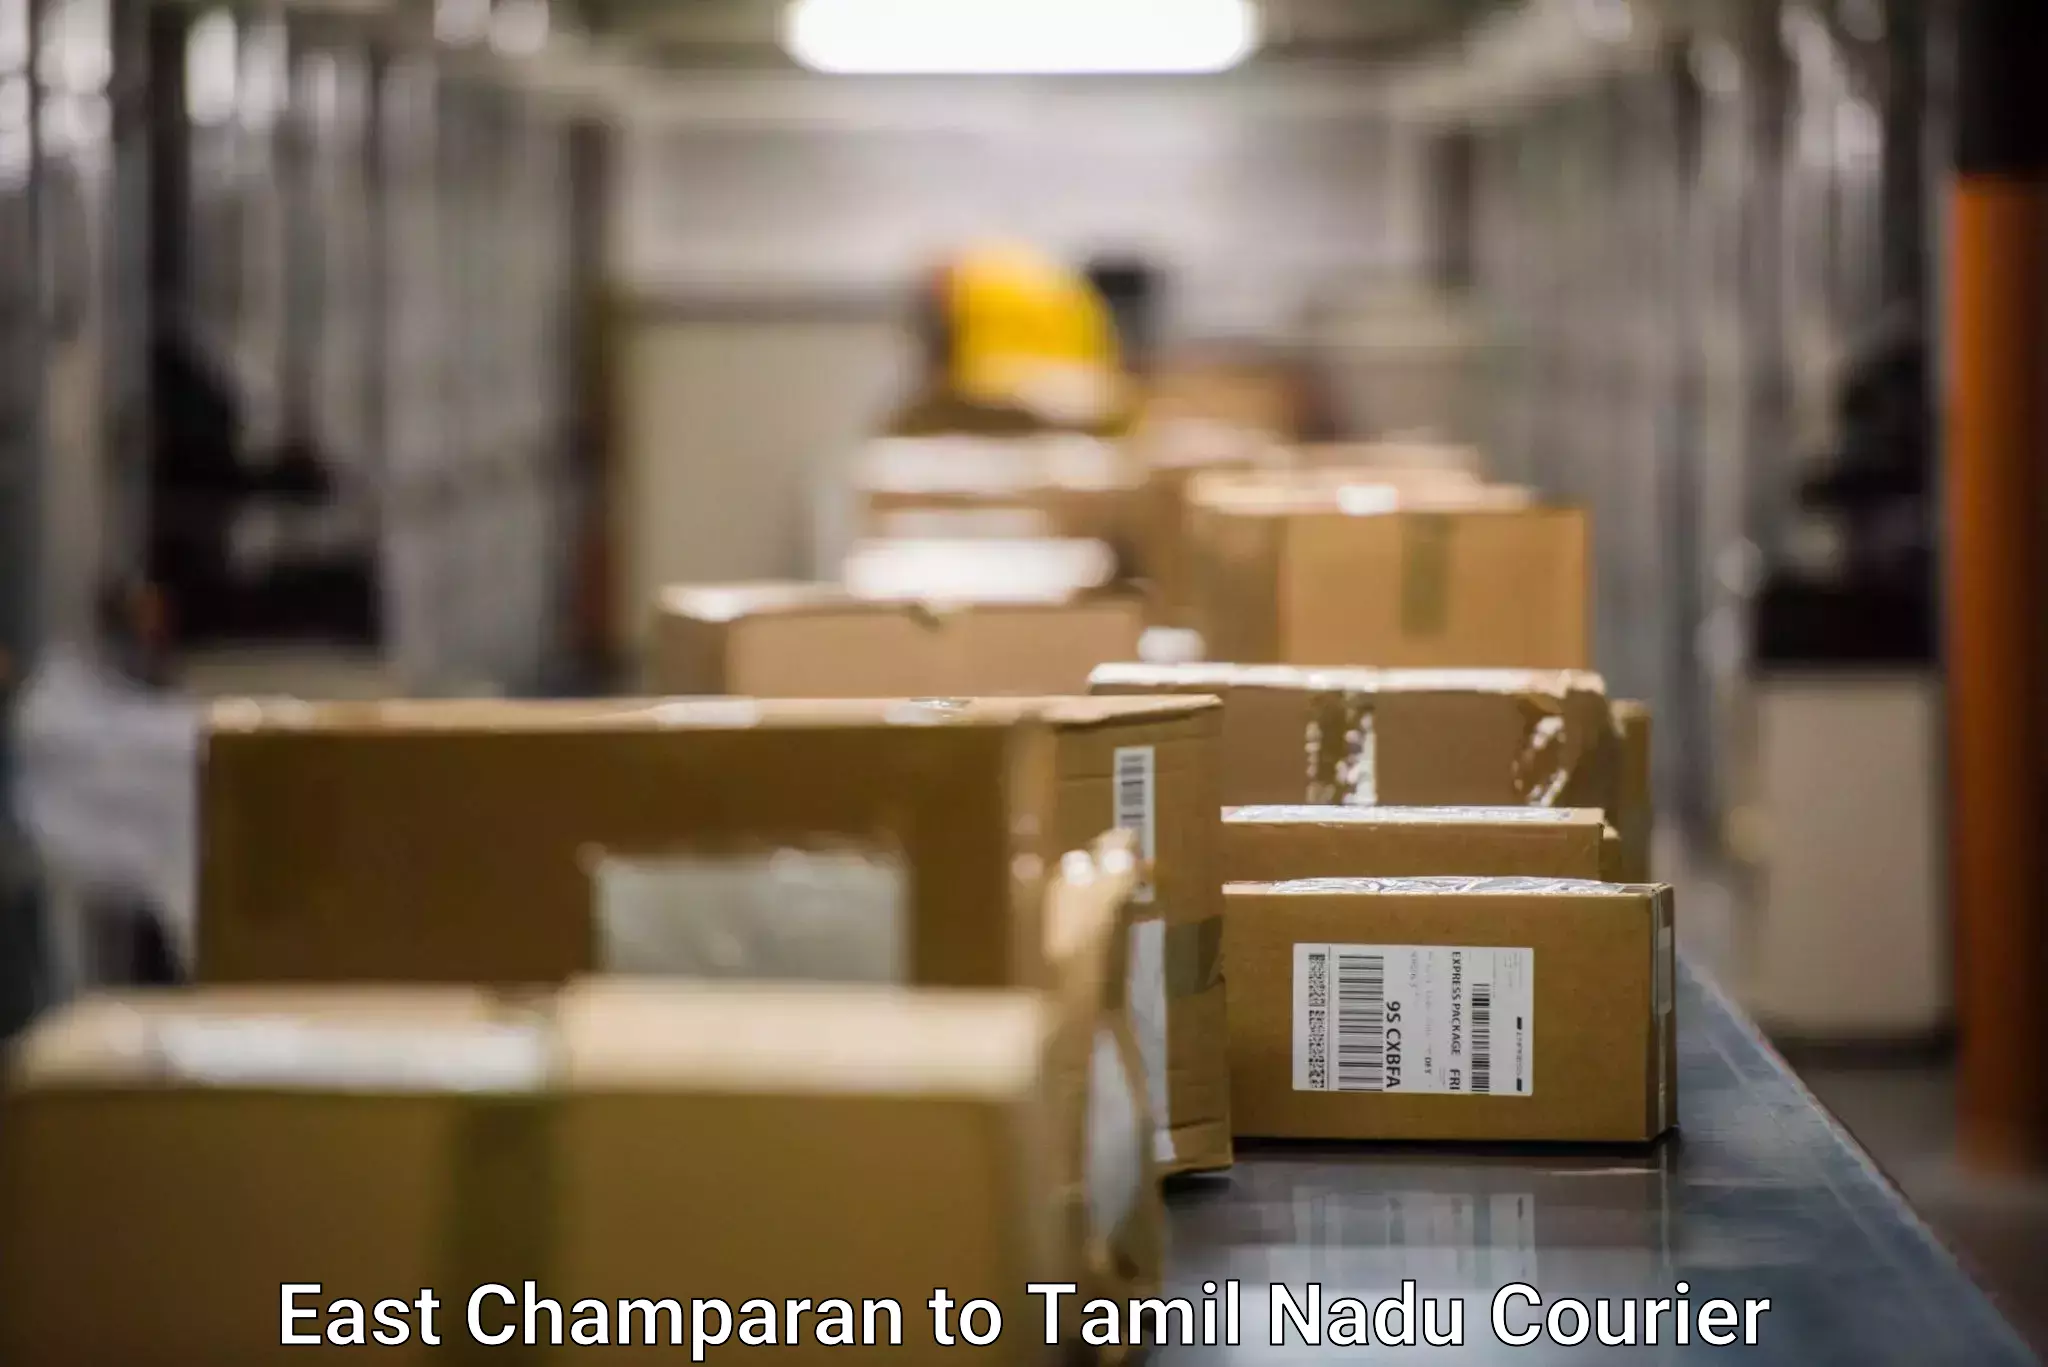 On-call courier service East Champaran to Tamil Nadu